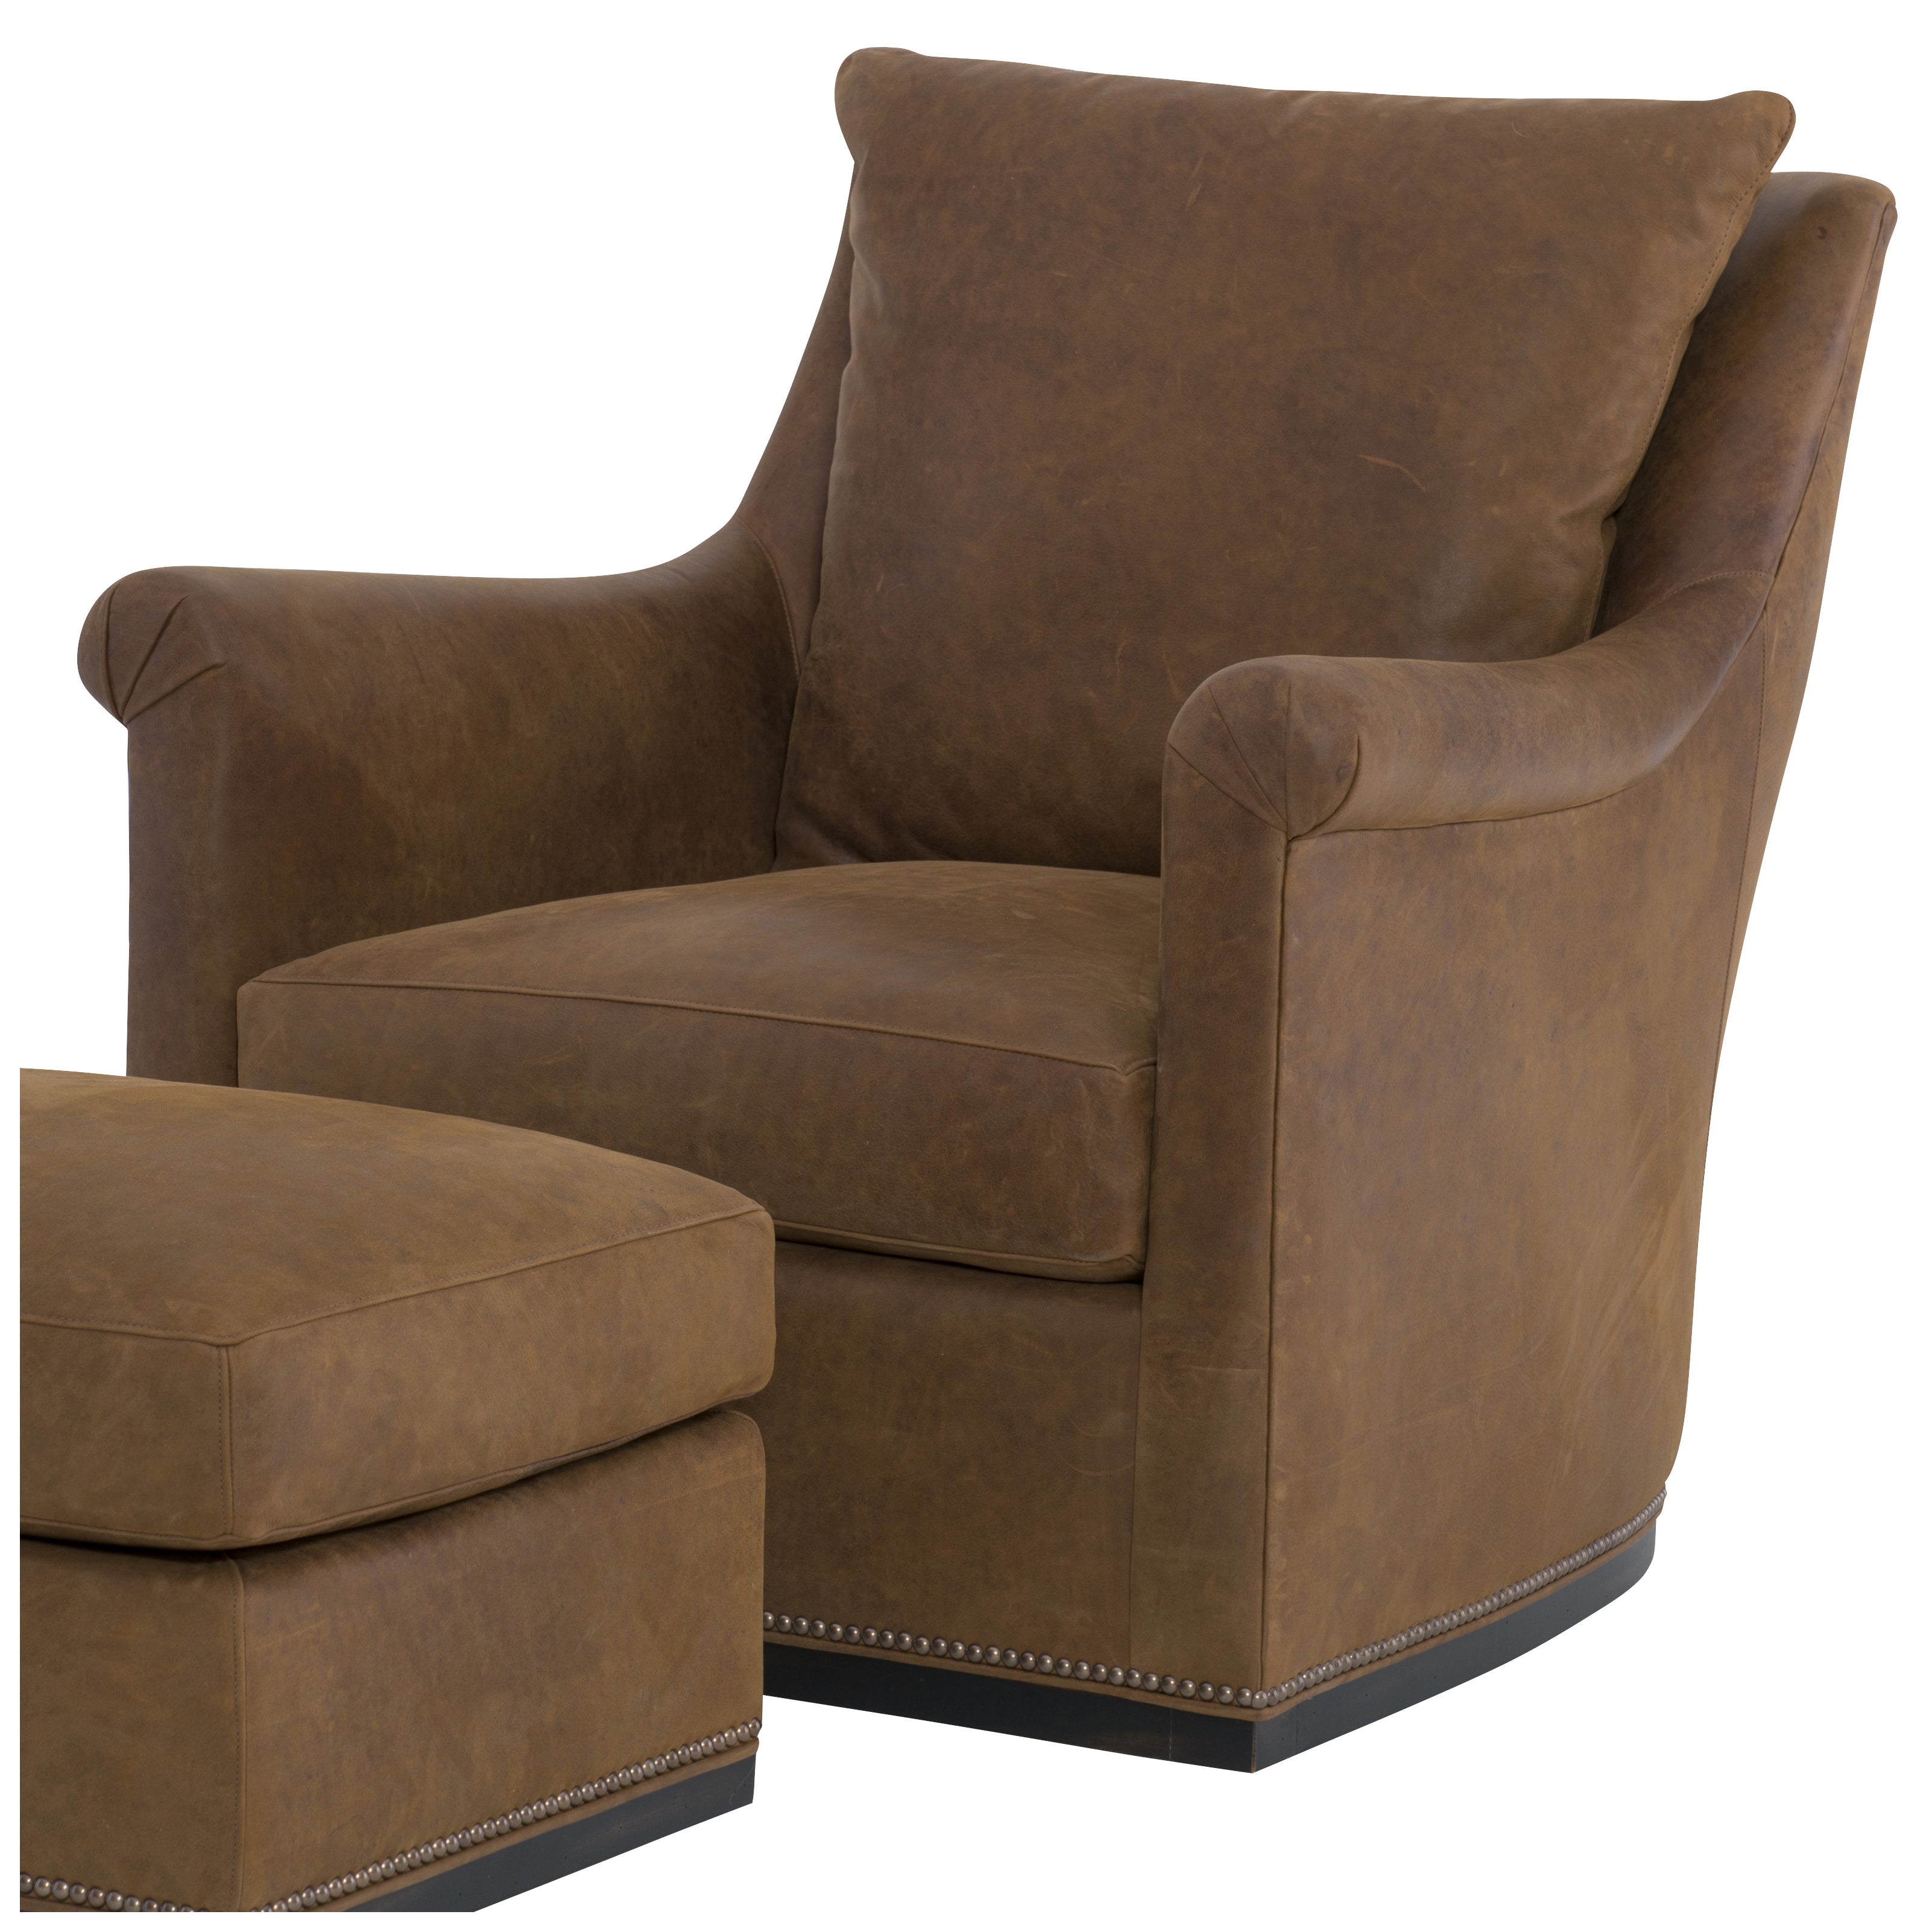 Houston Leather Swivel Chair by Wesley Hall shown in Zulu Cigar - close up